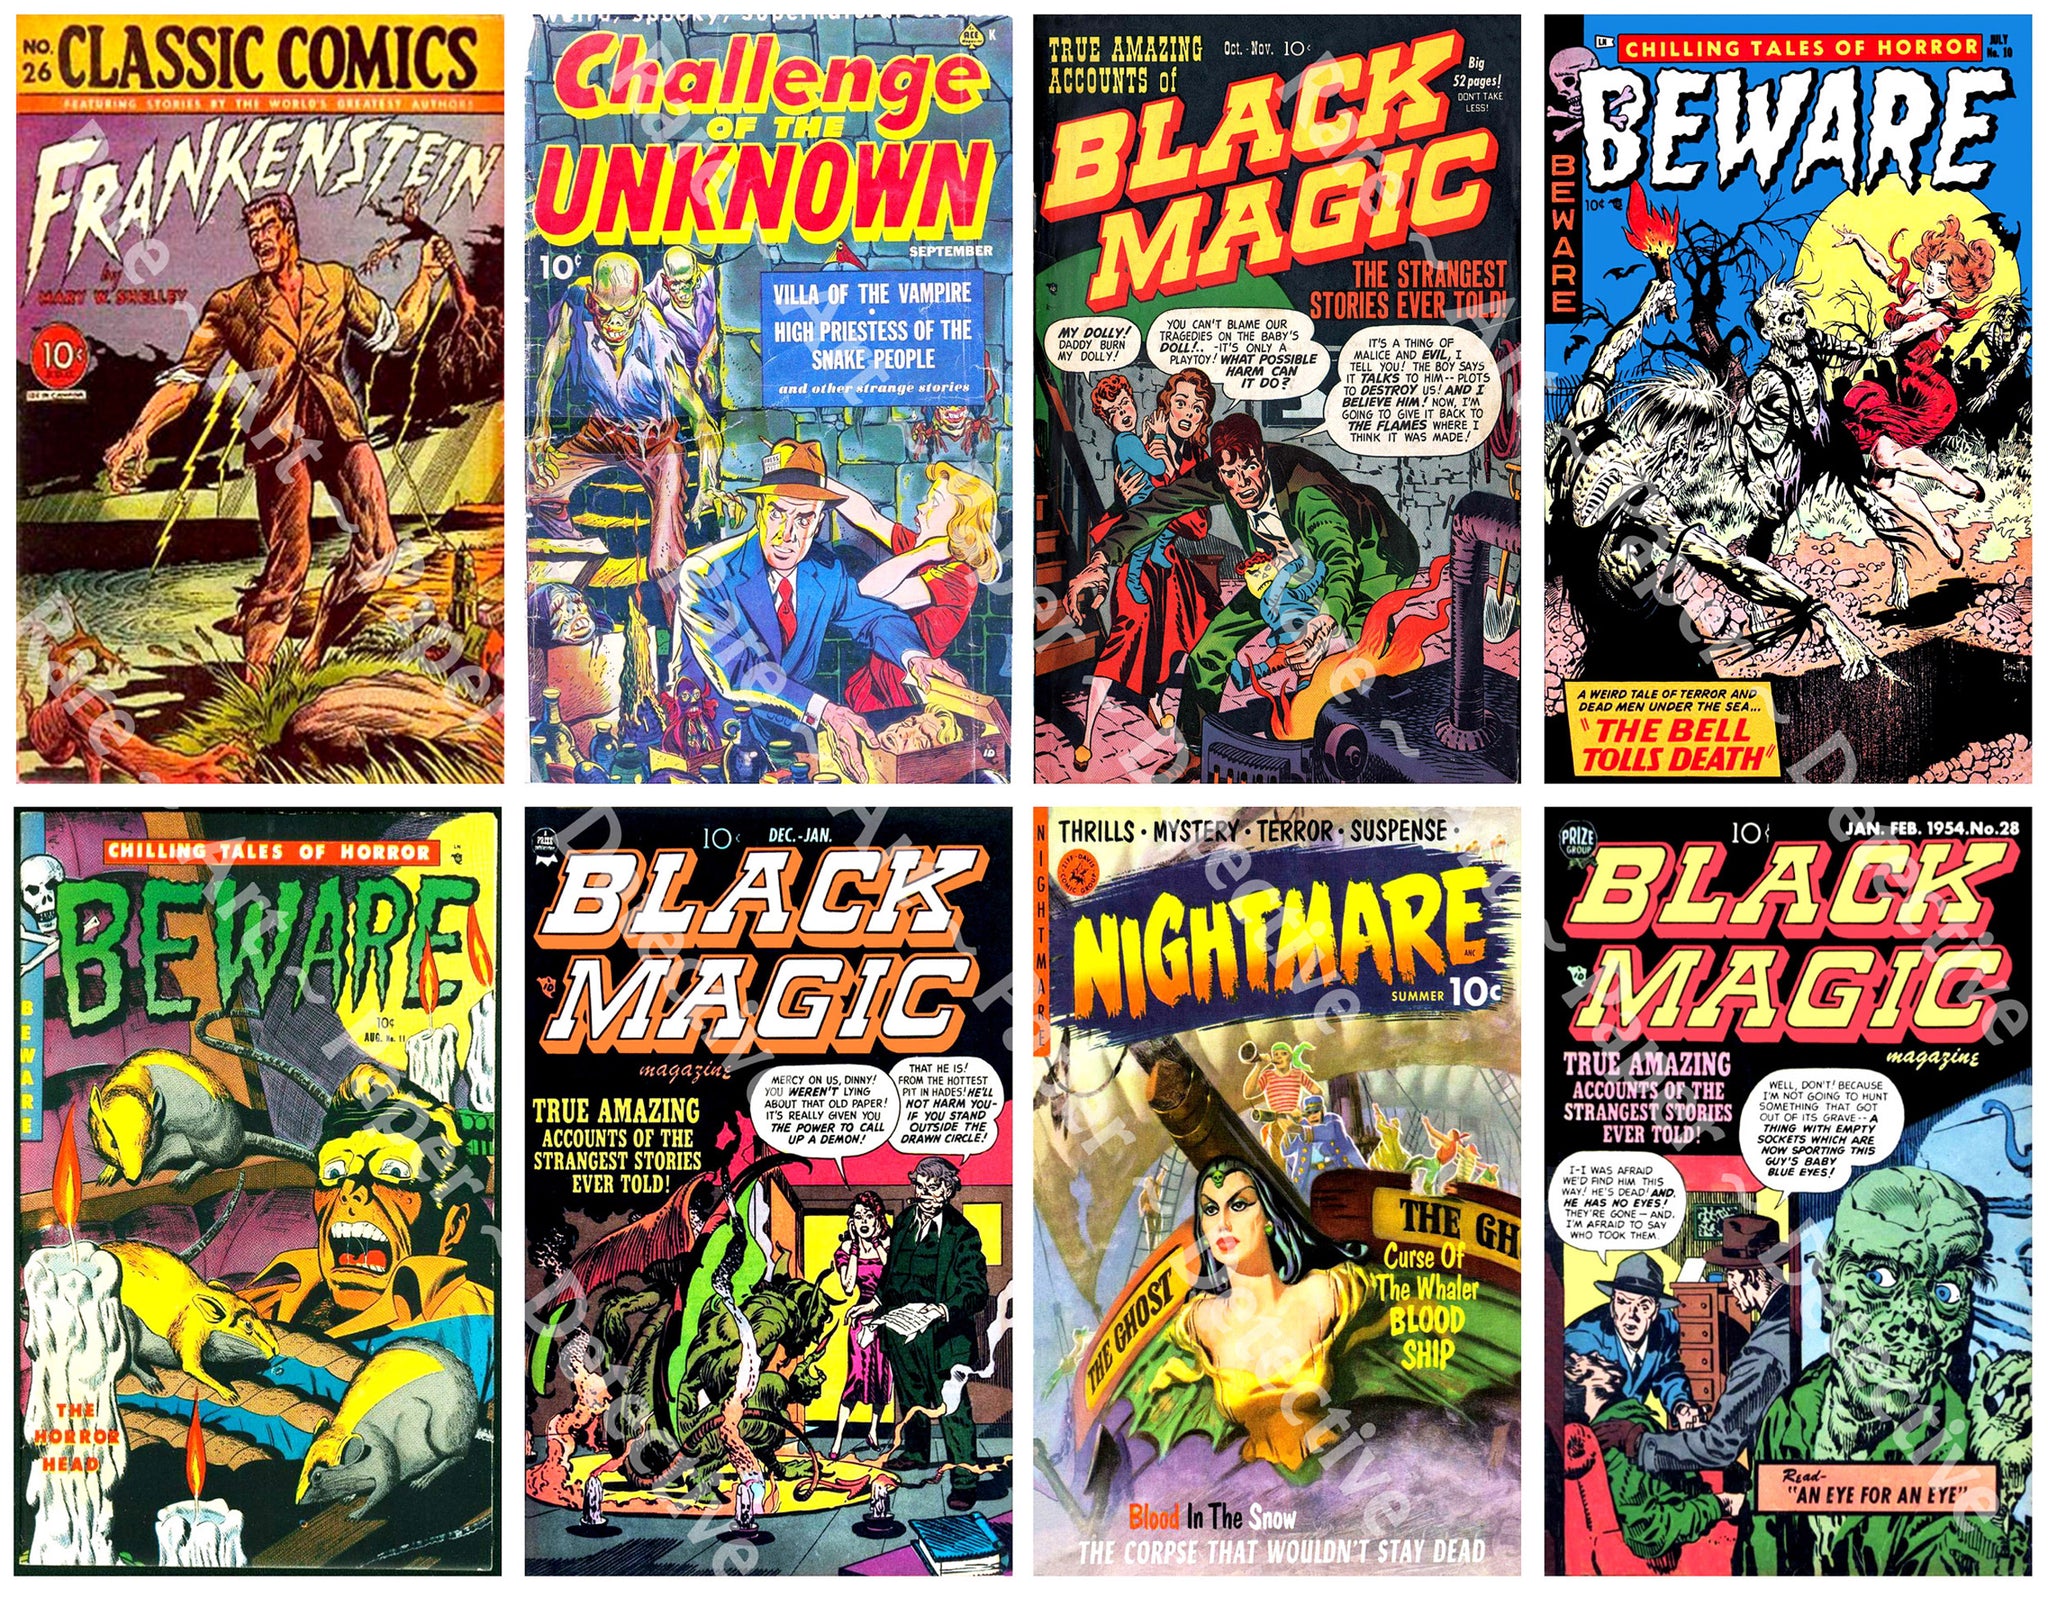 Comic Book Cover Stickers, Classic Horror Comics, Vintage Halloween Sticker Décor, 2.5" x 4" Tags, DIY Projects and Décor, CUT & PEEL Sheet, 1165